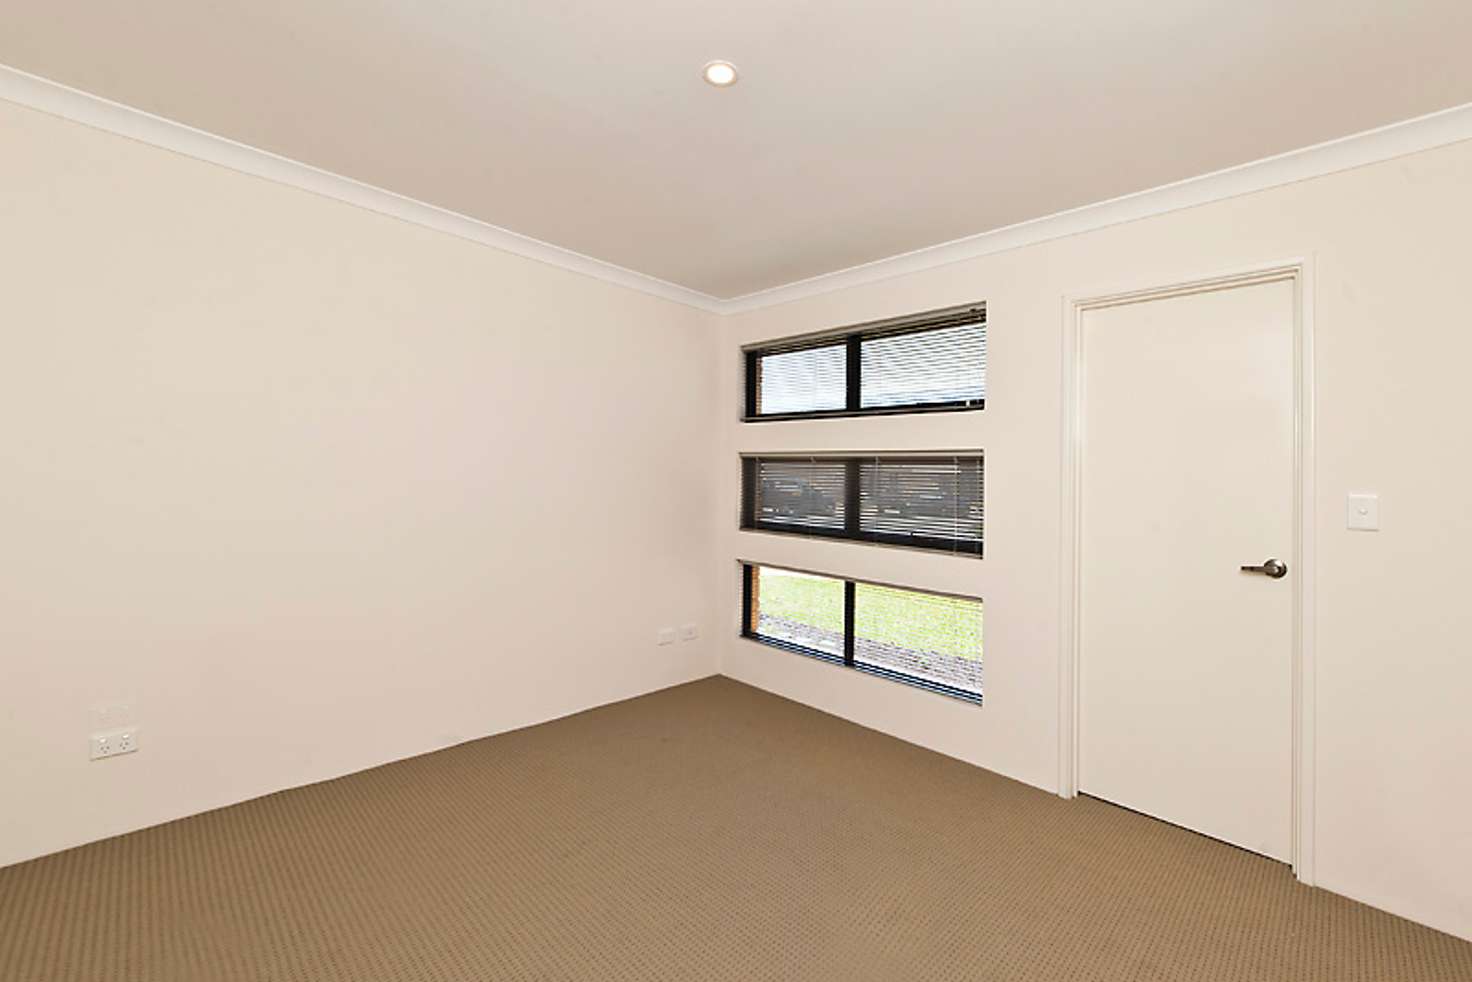 Main view of Homely house listing, 15 Monjon Way, Baldivis WA 6171